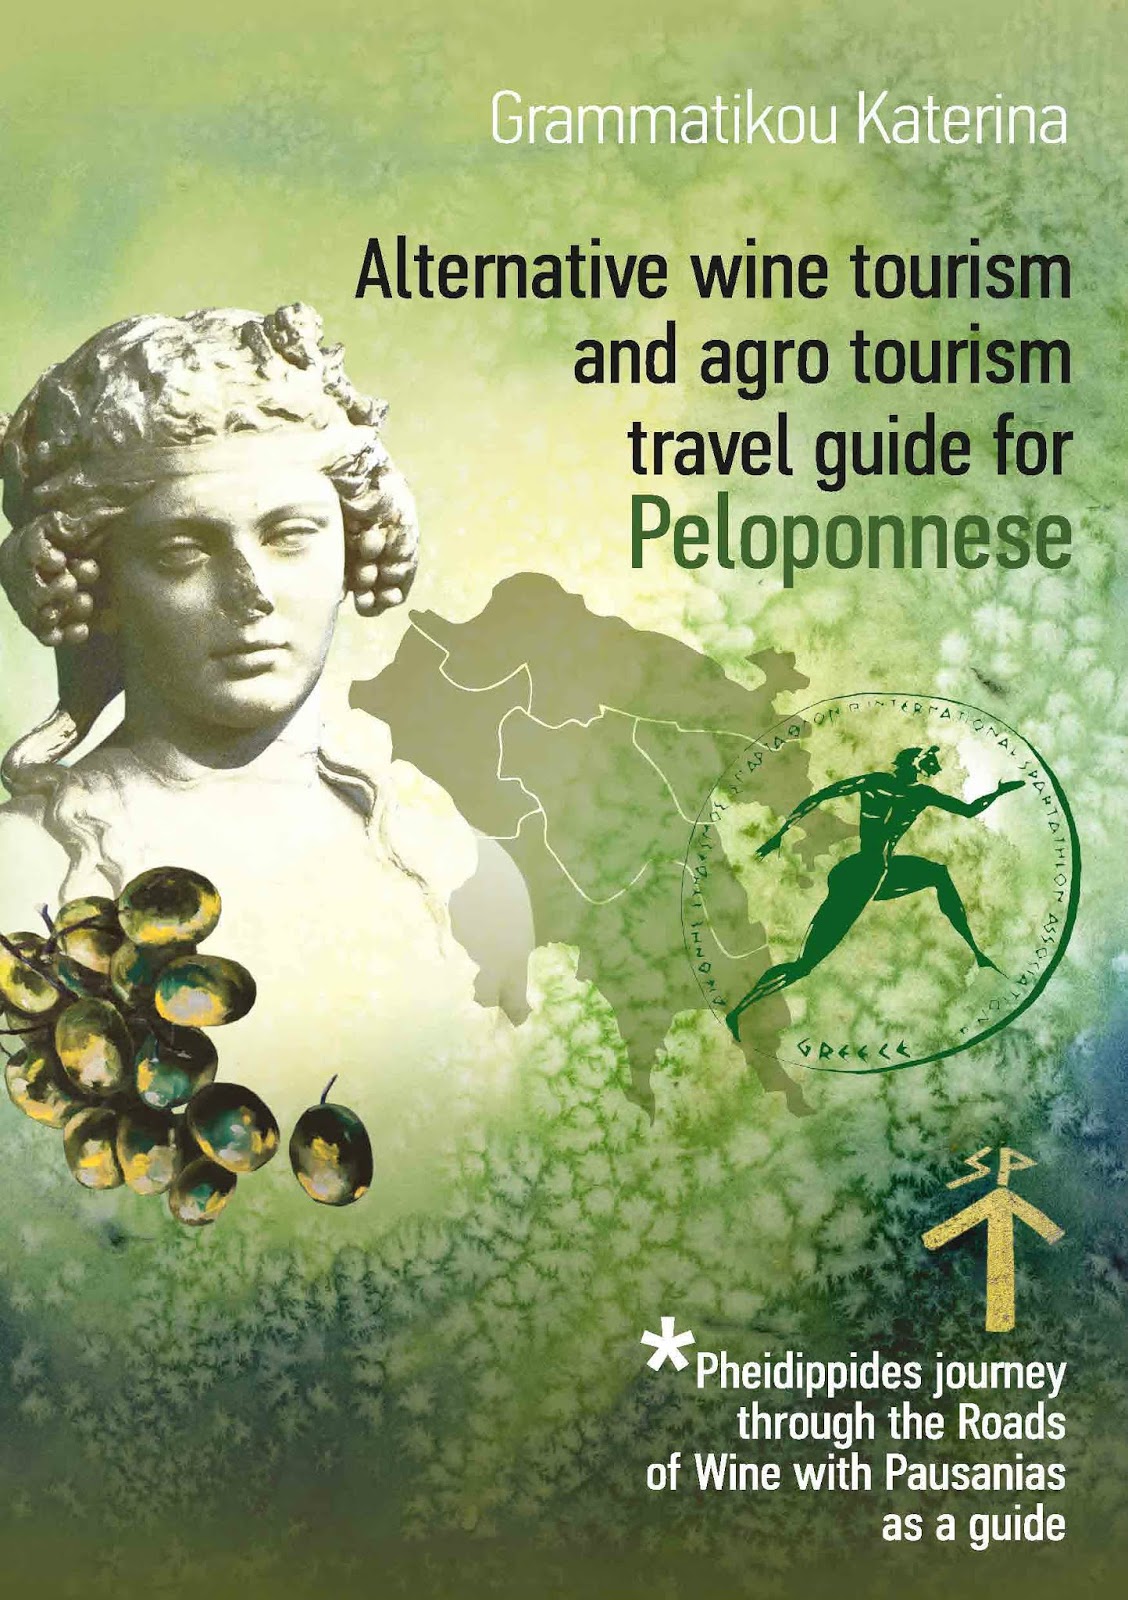 The Alternative Guide Book For Peloponnese follow Phedippides journey through the roads of wine with Pausanias as a guide.